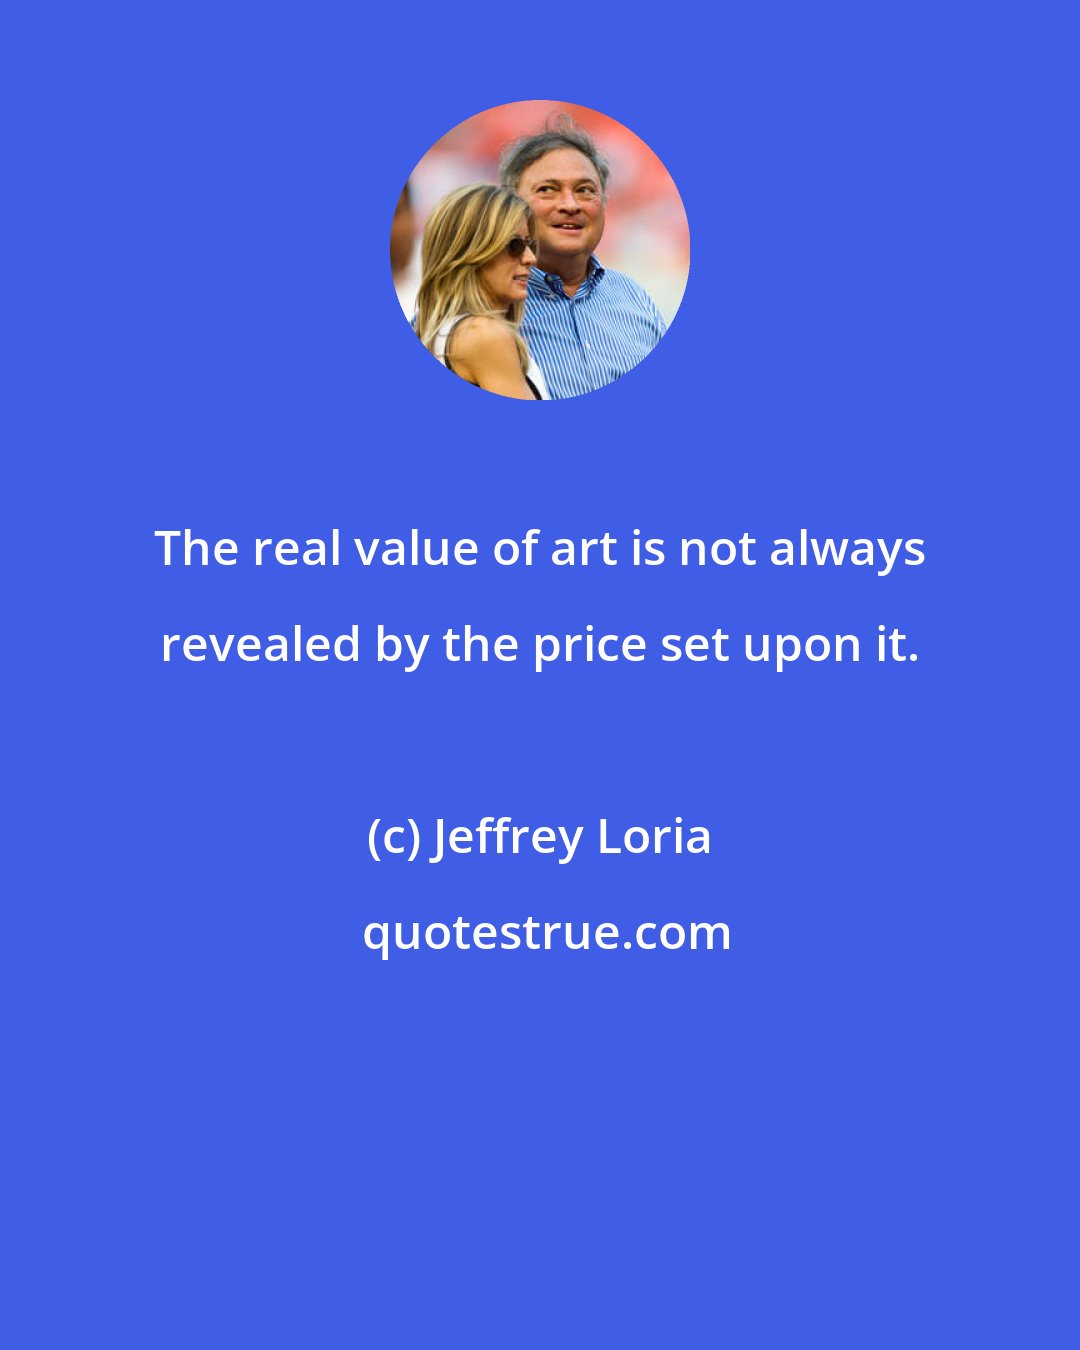 Jeffrey Loria: The real value of art is not always revealed by the price set upon it.